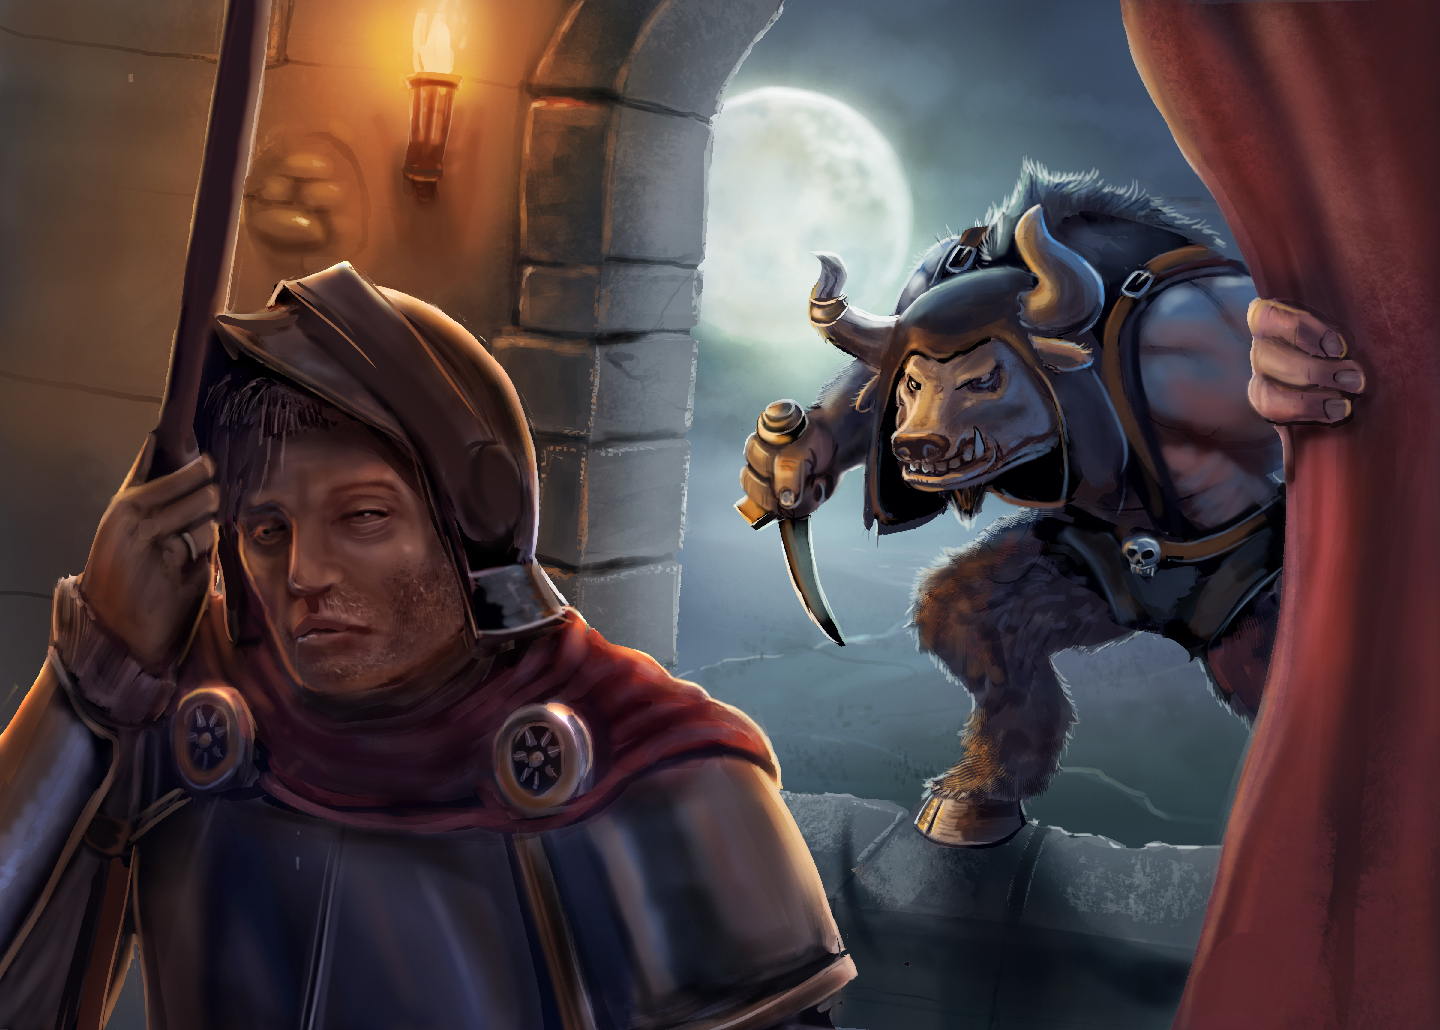 Minotaur assassin sneaking, fantasy art made by The Noble Artist for a fantasy animation. 